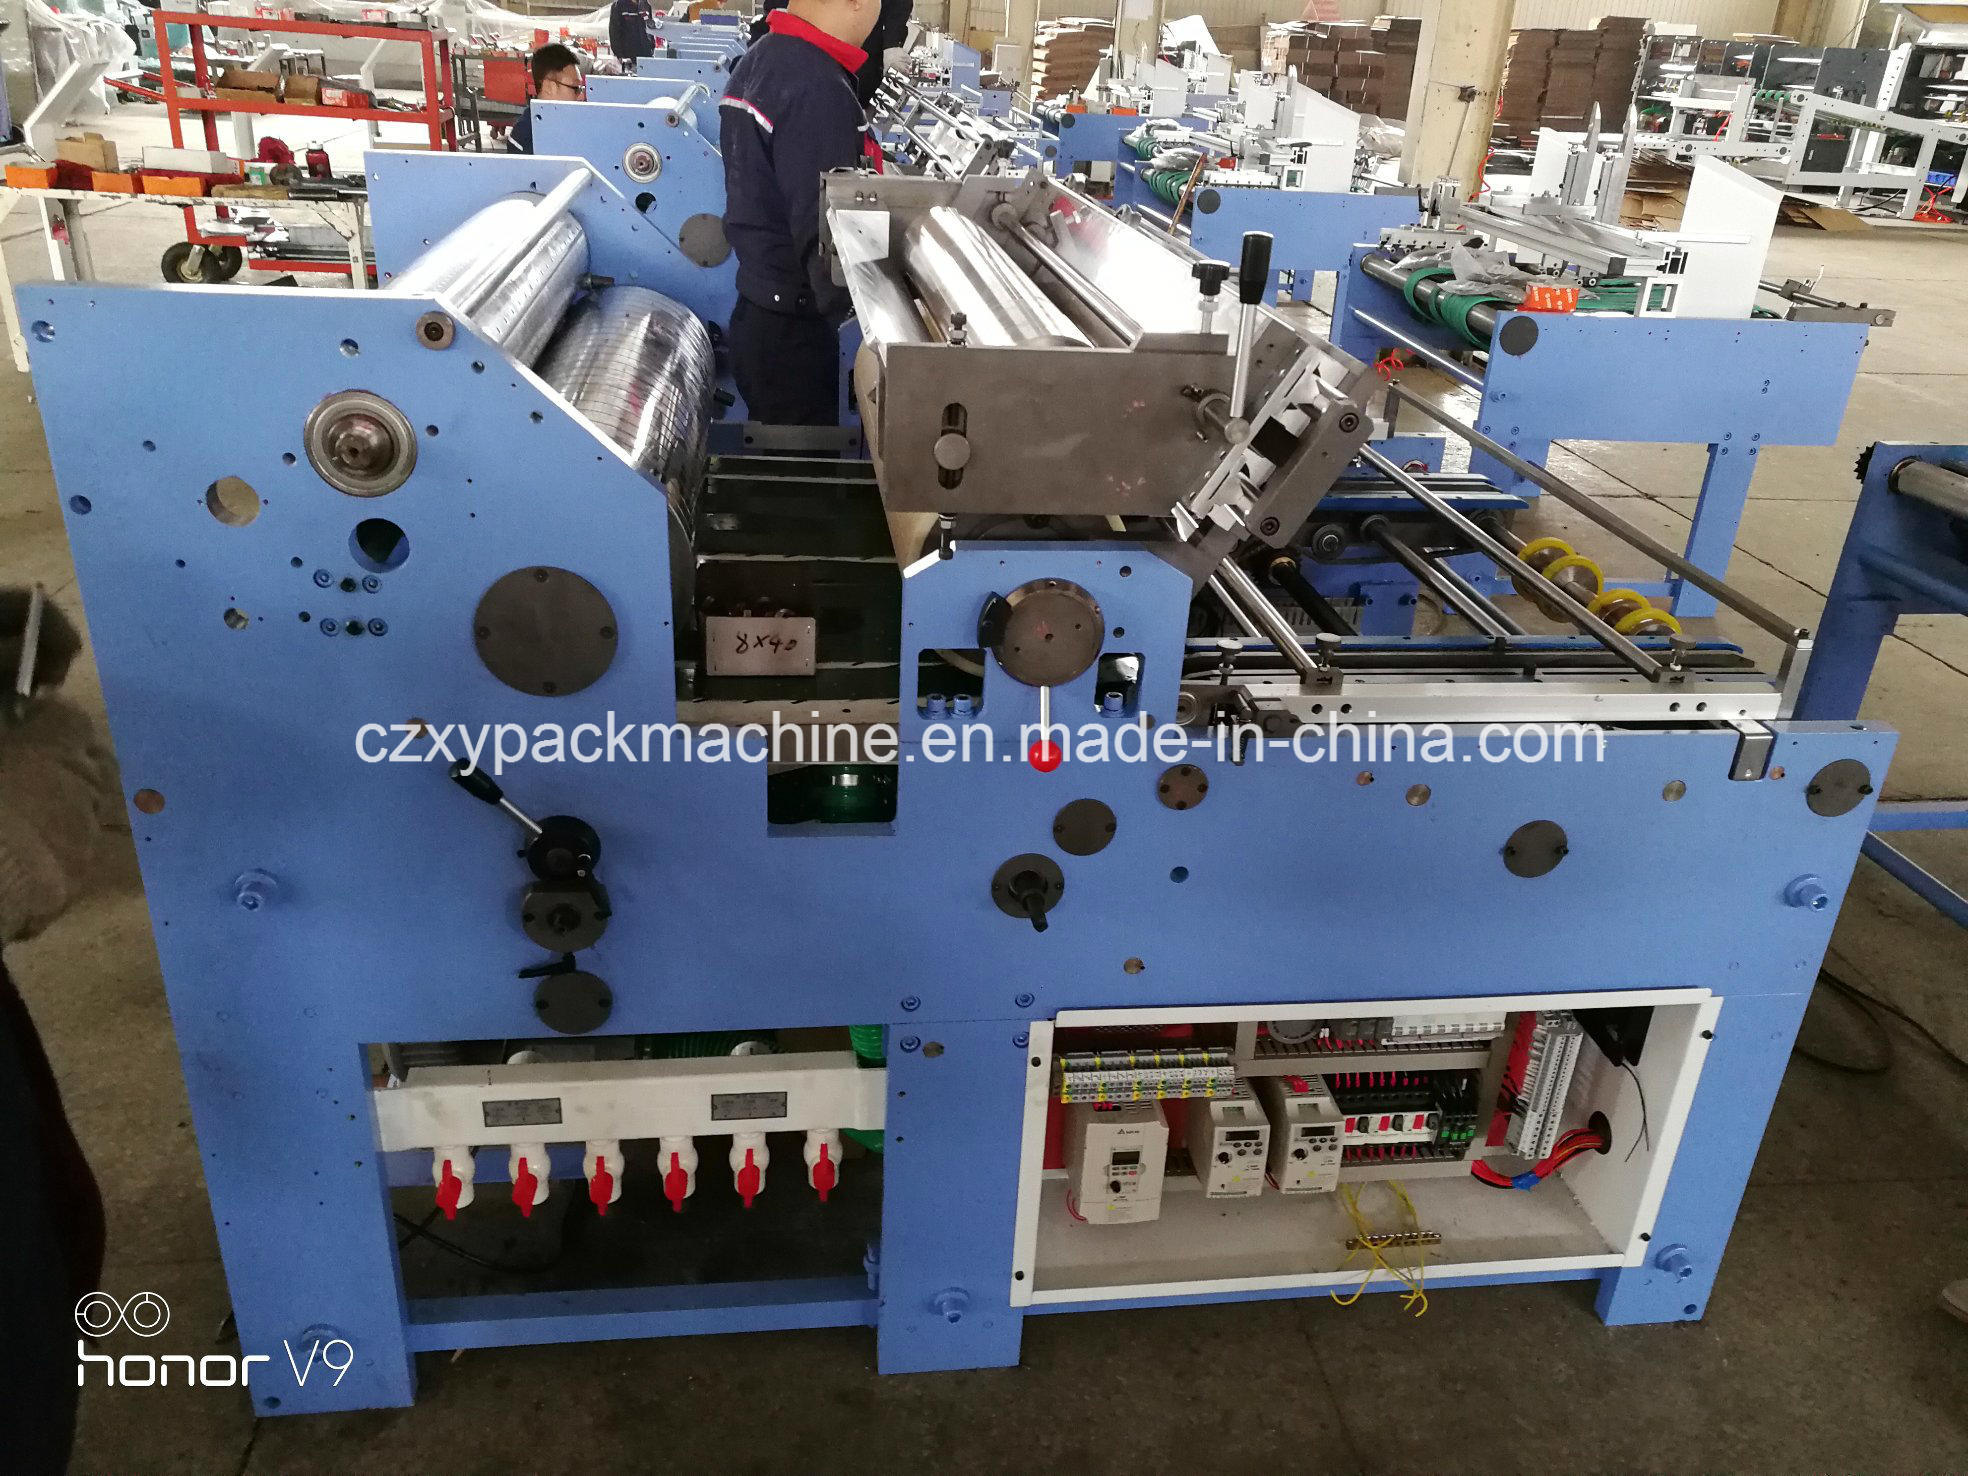 Full Automatic The Xltc-1020 Window Patching Machine